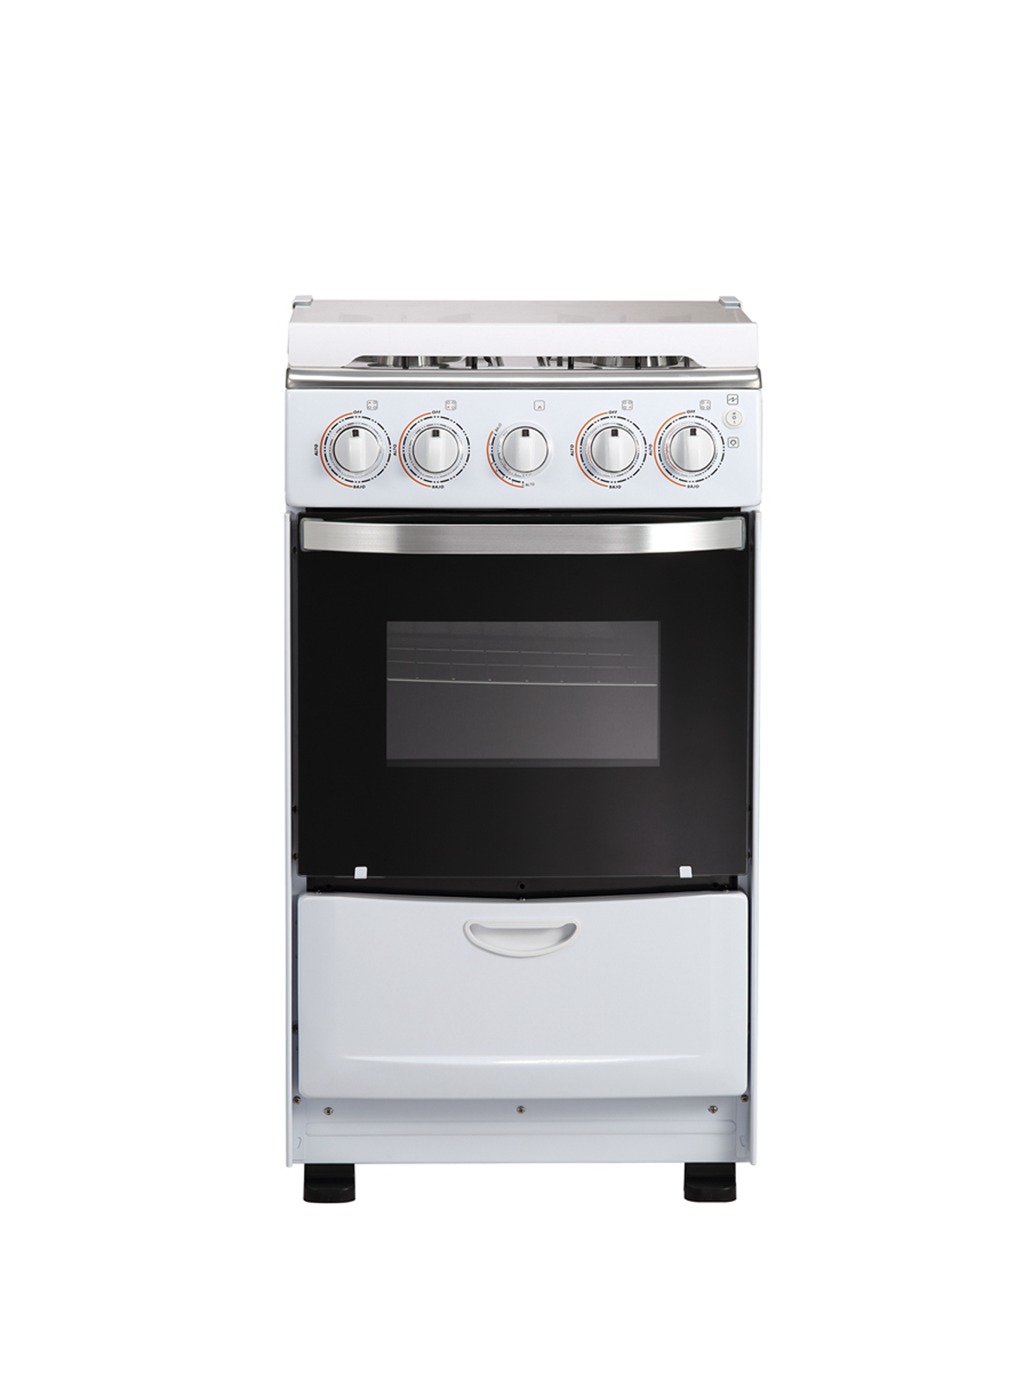  20 Inches Wide Gas Oven With 4 Burners